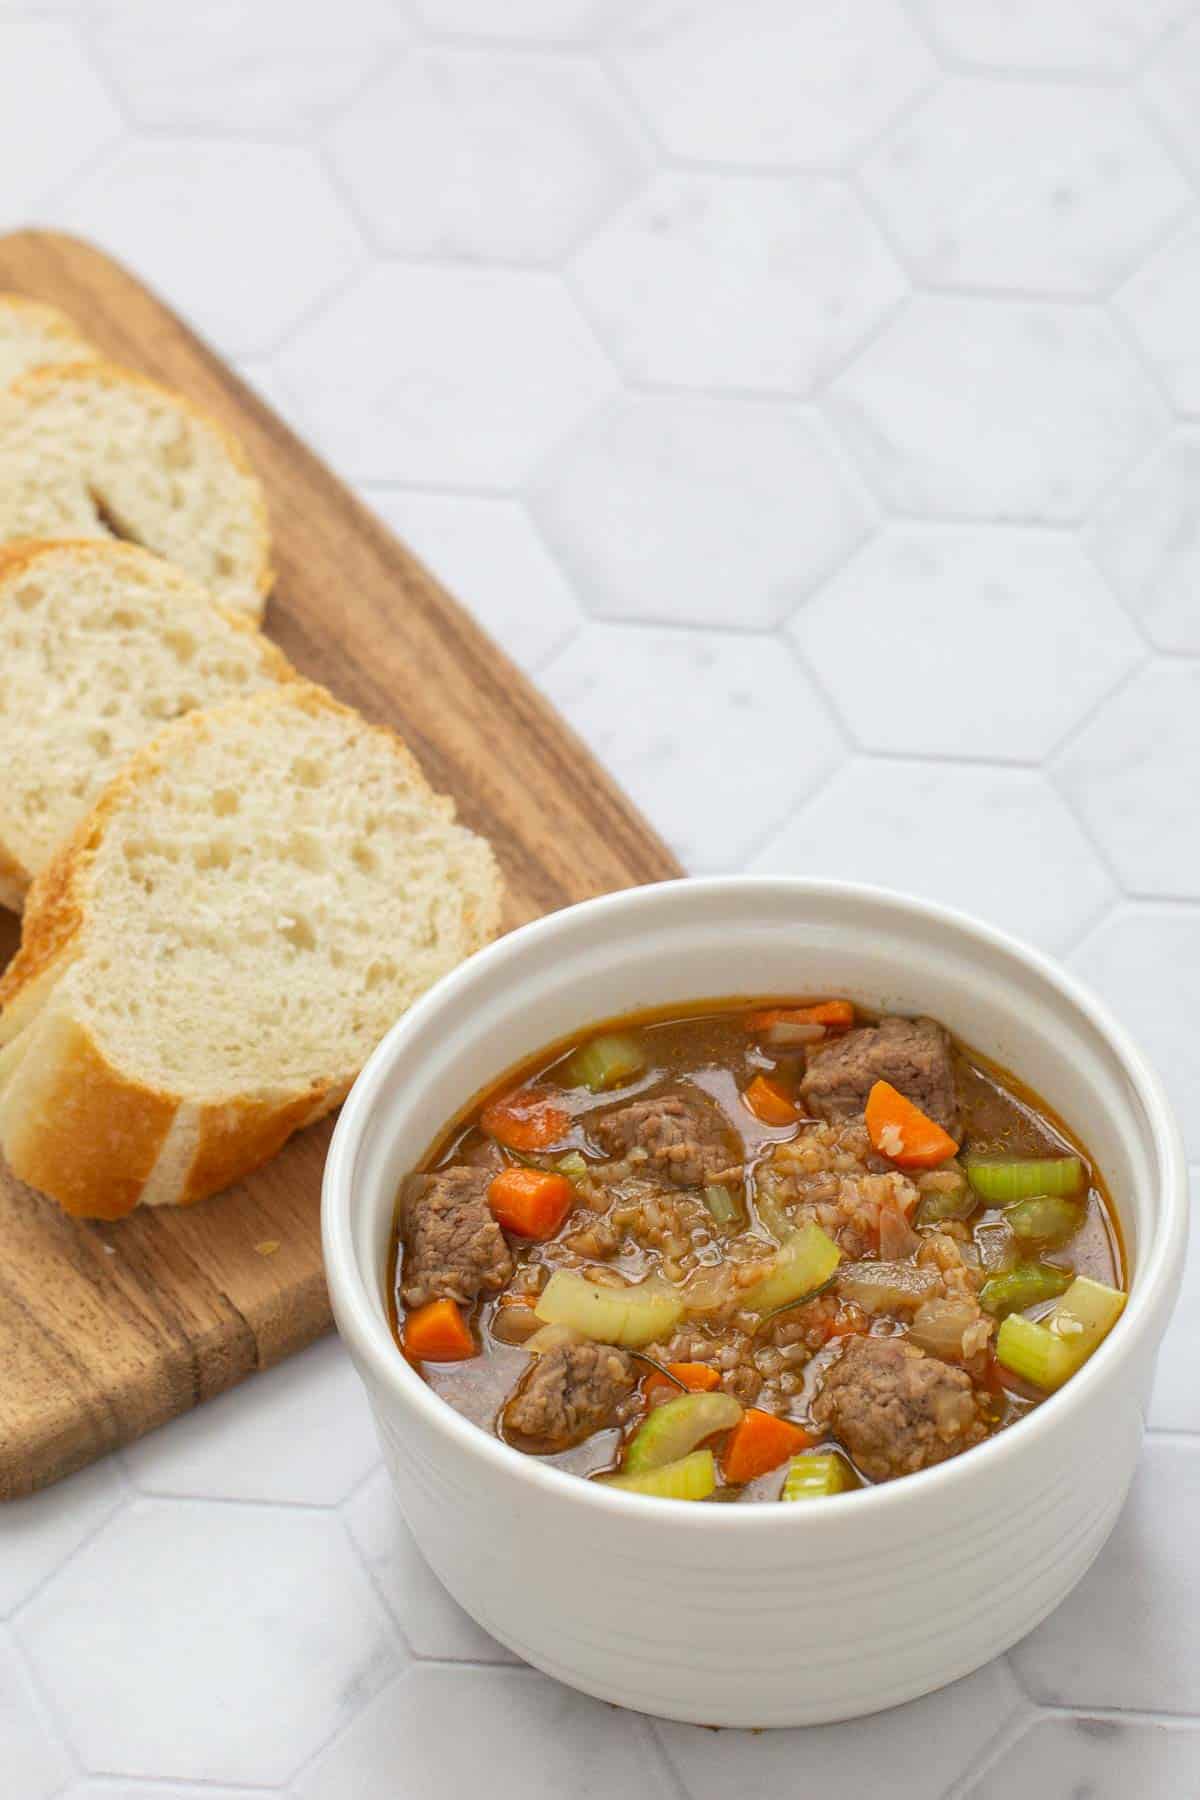 purple meat bulgur soup in white bowl with bread  Pork Bulgur Soup Beef Bulgur Soup Image